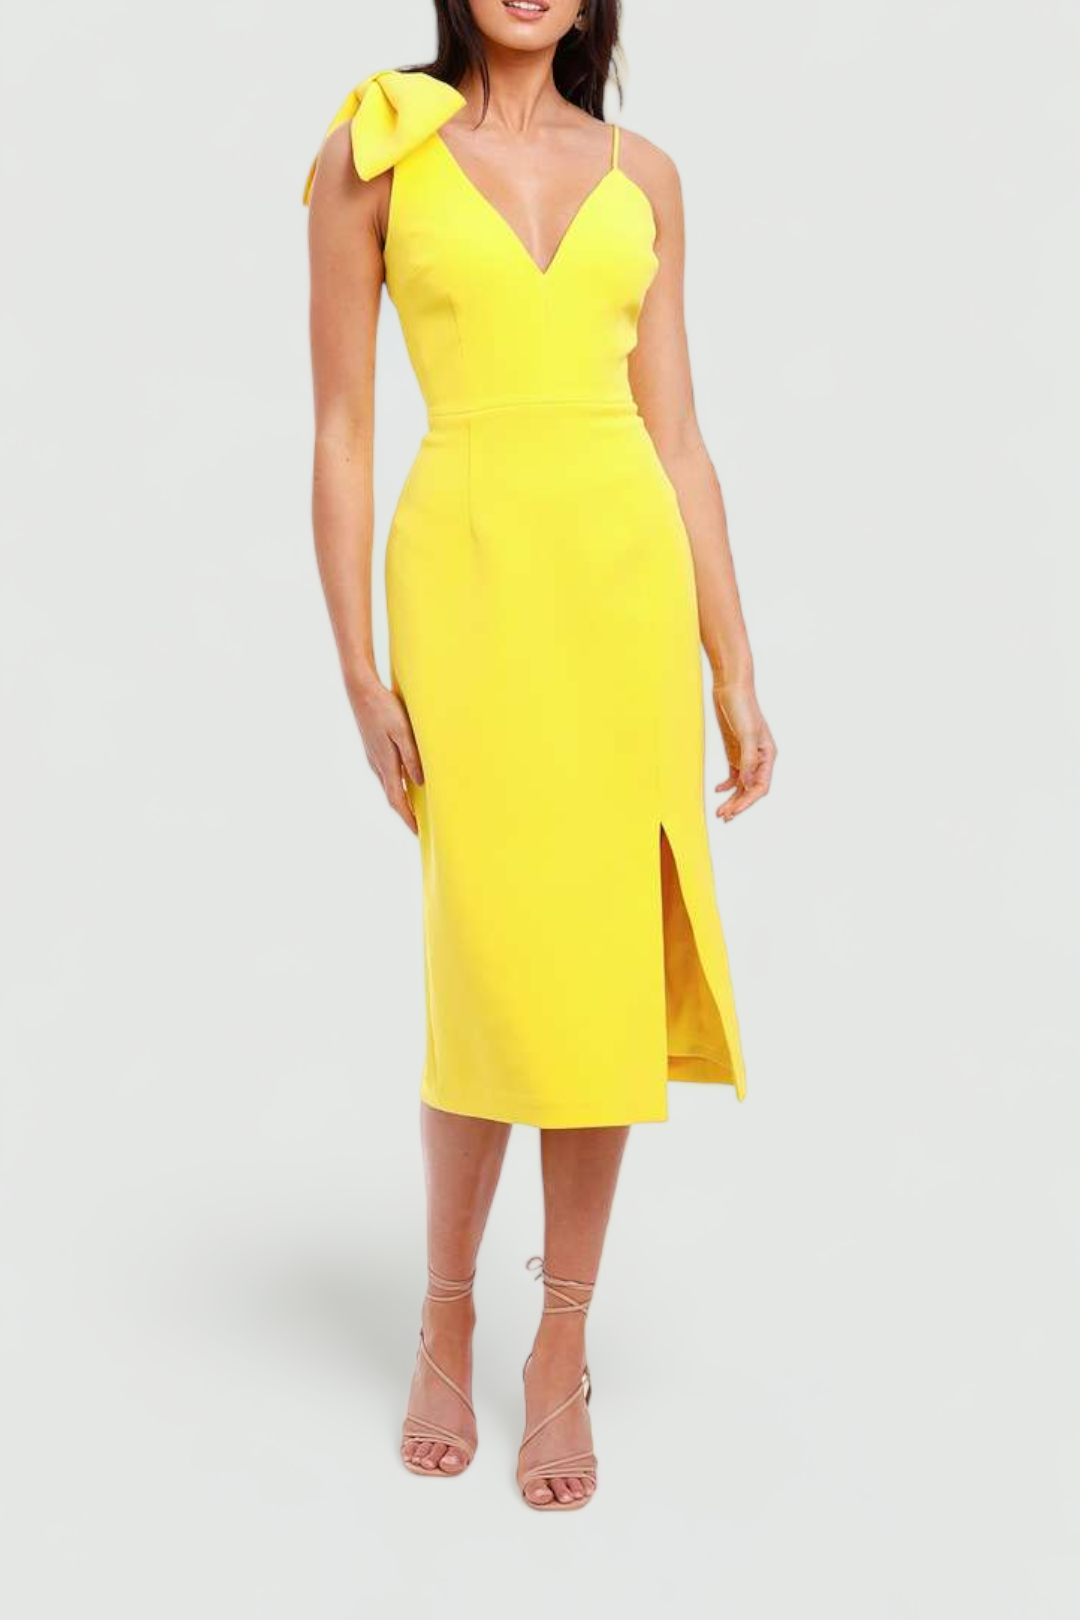 Rebecca Vallance Love Bow Dress Yellow One Shoulder